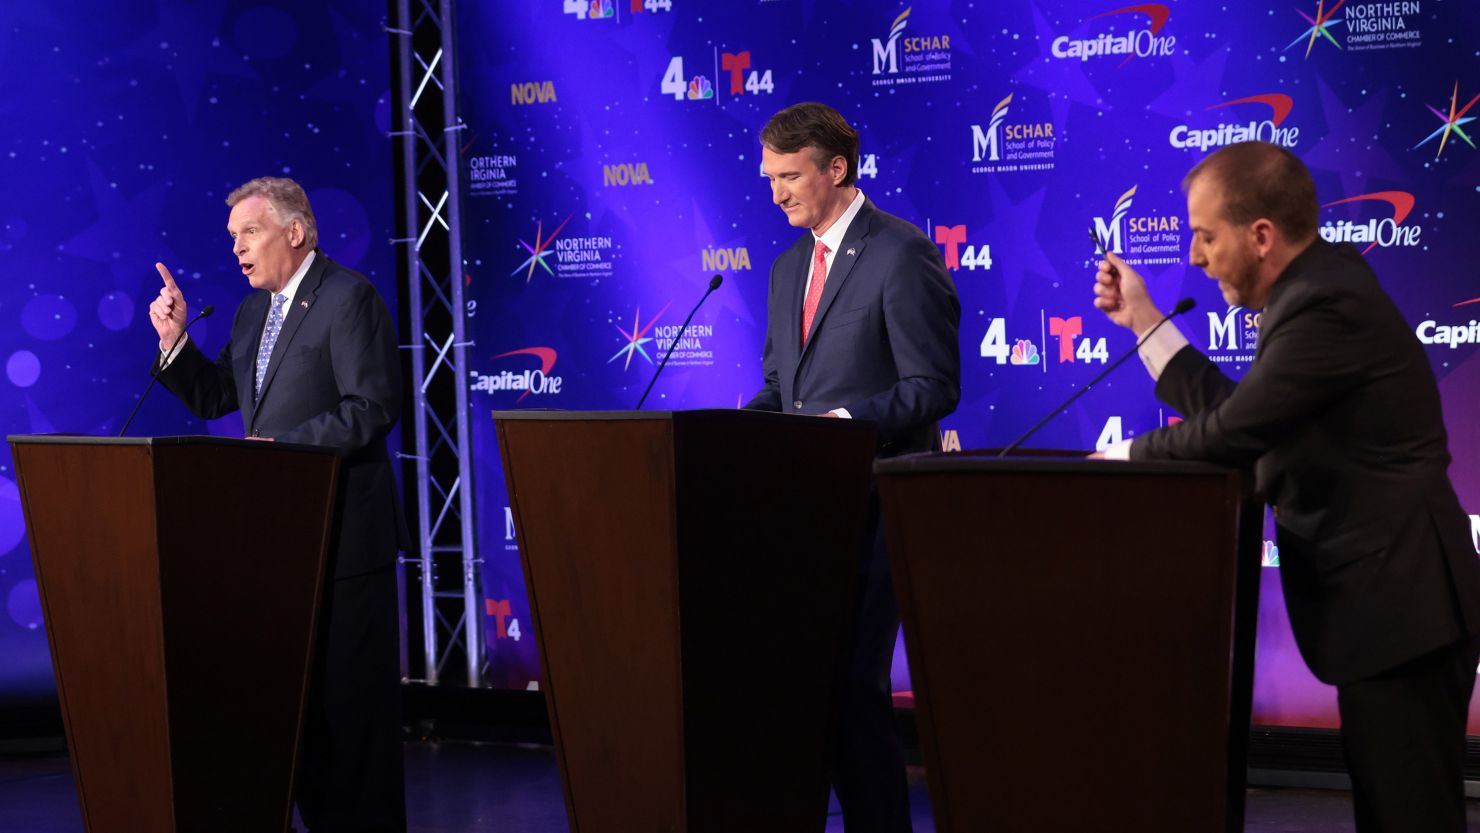 ALEXANDRIA, VIRGINIA - SEPTEMBER 28:  Former Virginia Gov. Terry McAuliffe (L) (D-VA) and Republican gubernatorial candidate Glenn Youngkin (C) participate in a debate hosted by the Northern Virginia Chamber of Commerce September 28, 2021 in Alexandria, Virginia. The gubernatorial election is November 2. Also pictured is moderator Chuck Todd (R).  (Photo by Win McNamee/Getty Images)